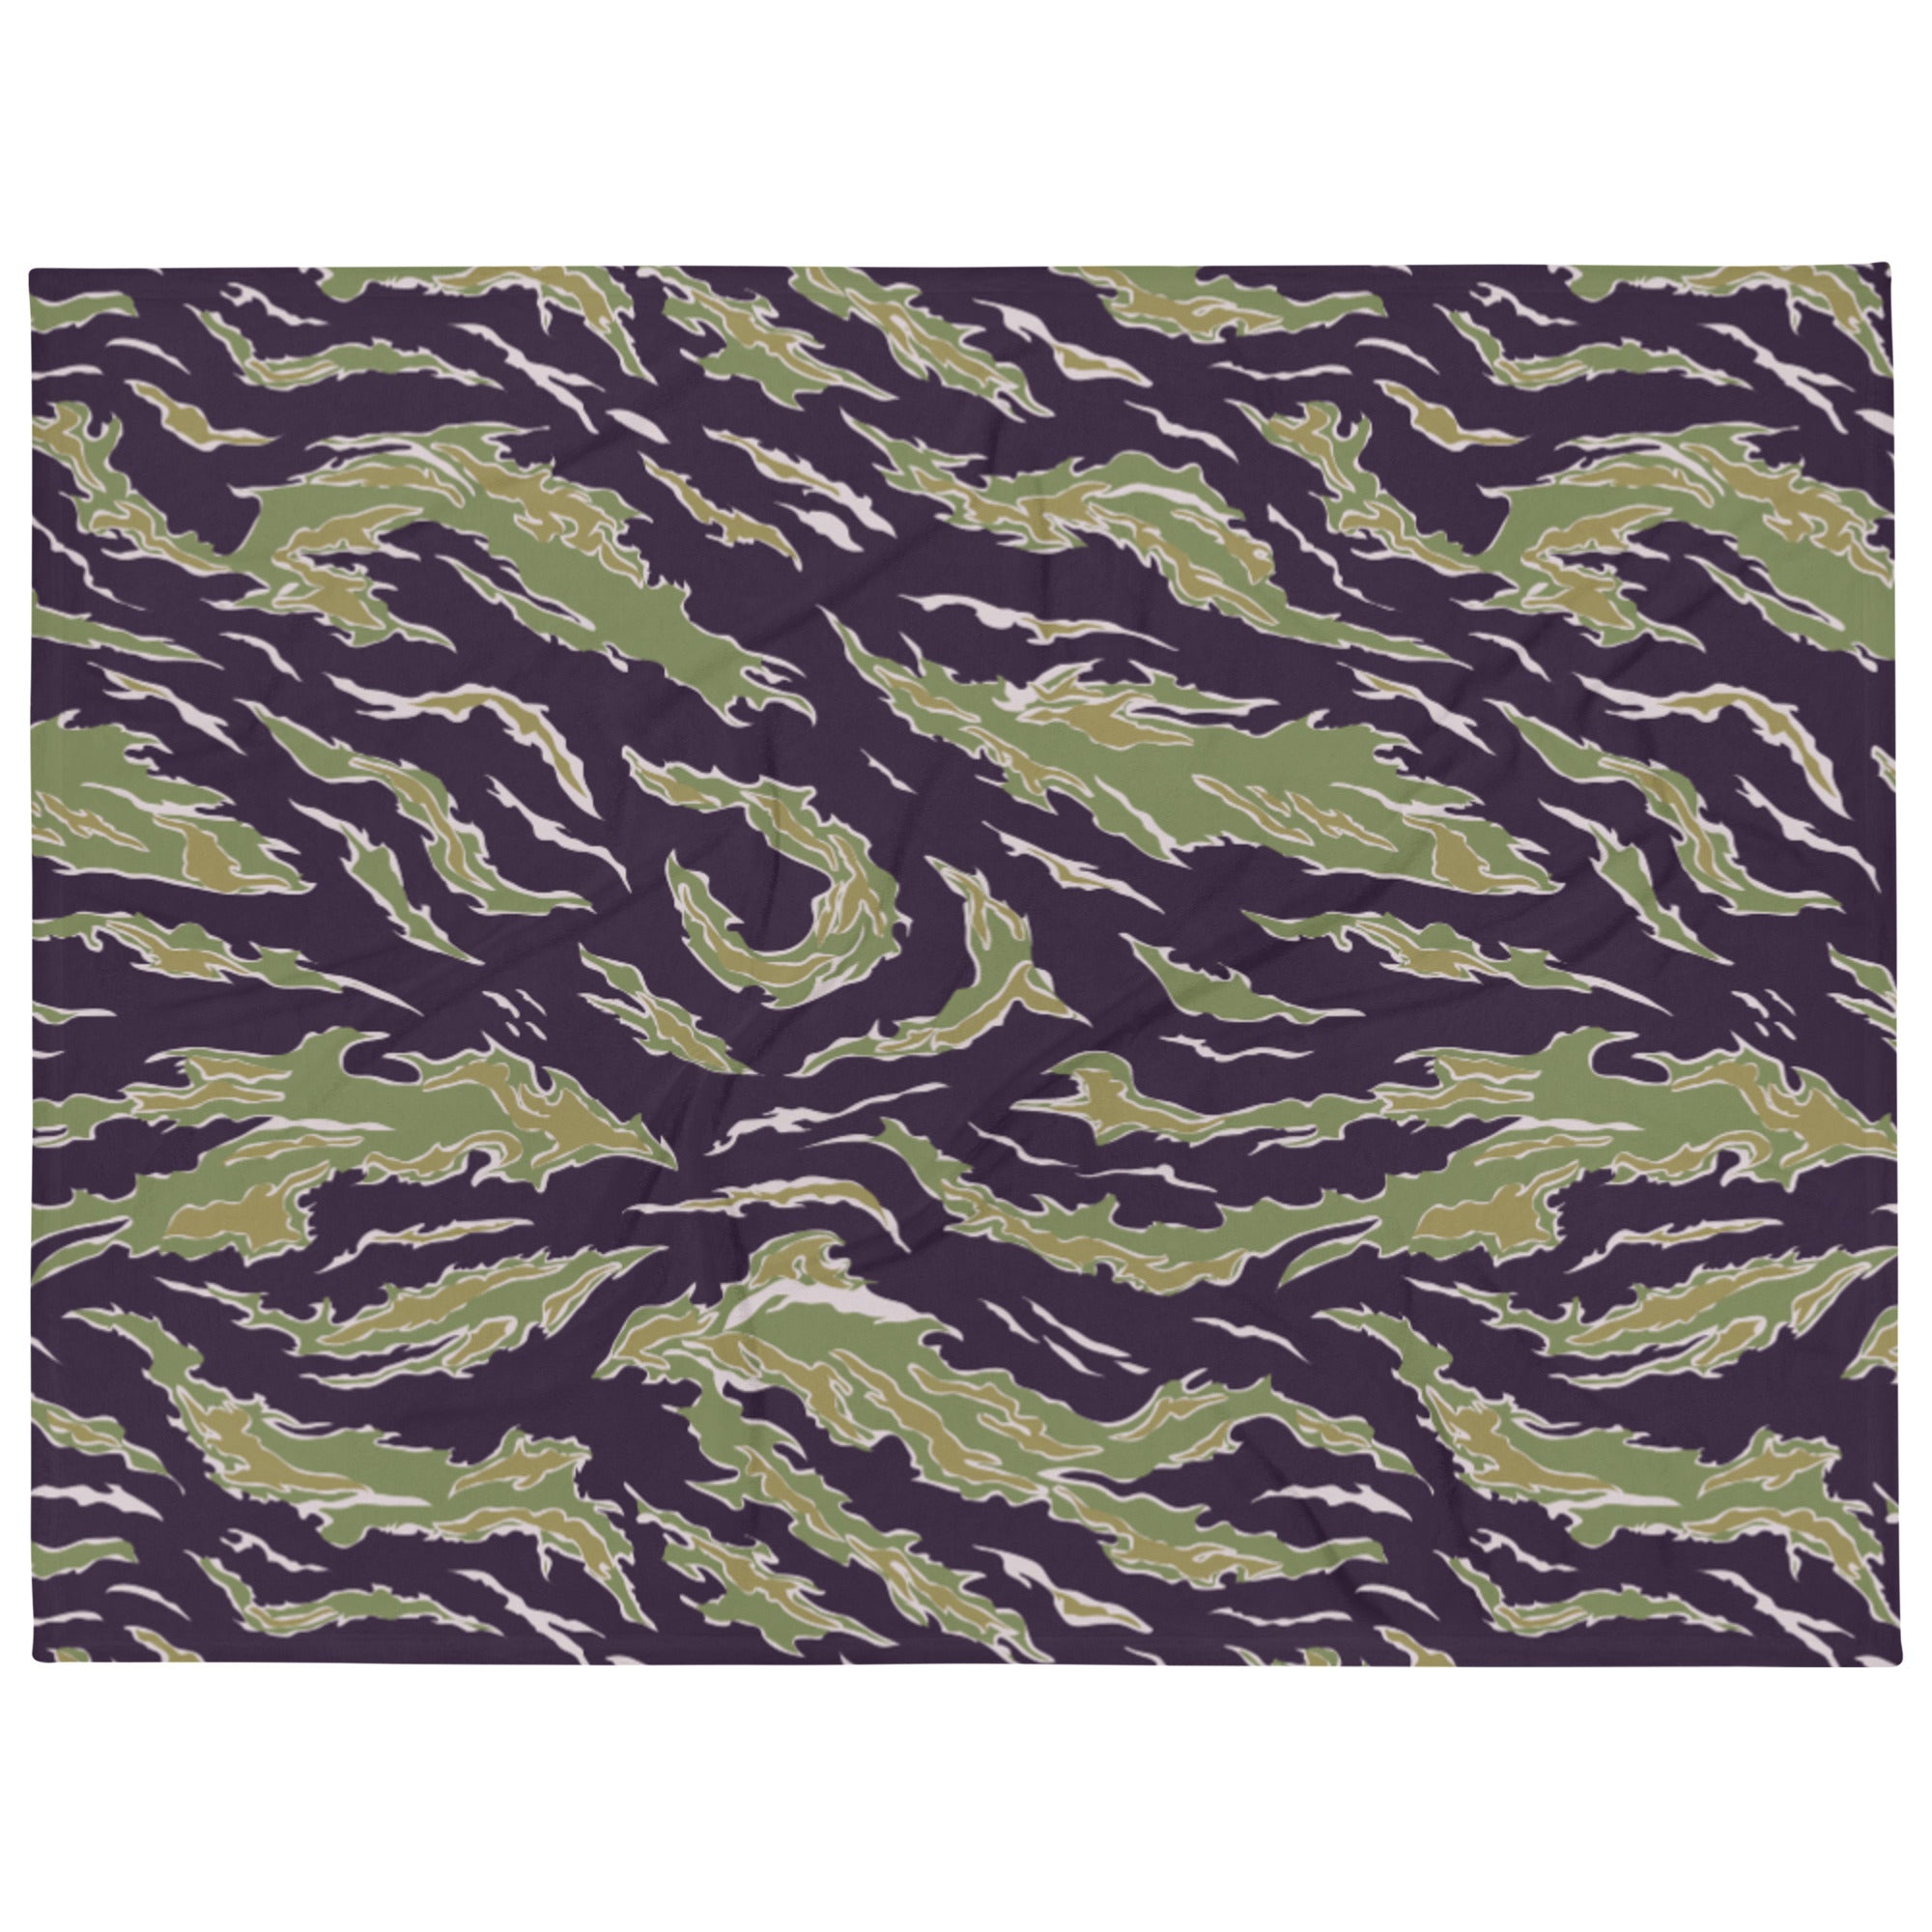 Tiger Stripe Jungle Camouflage Tactical Throw Blanket